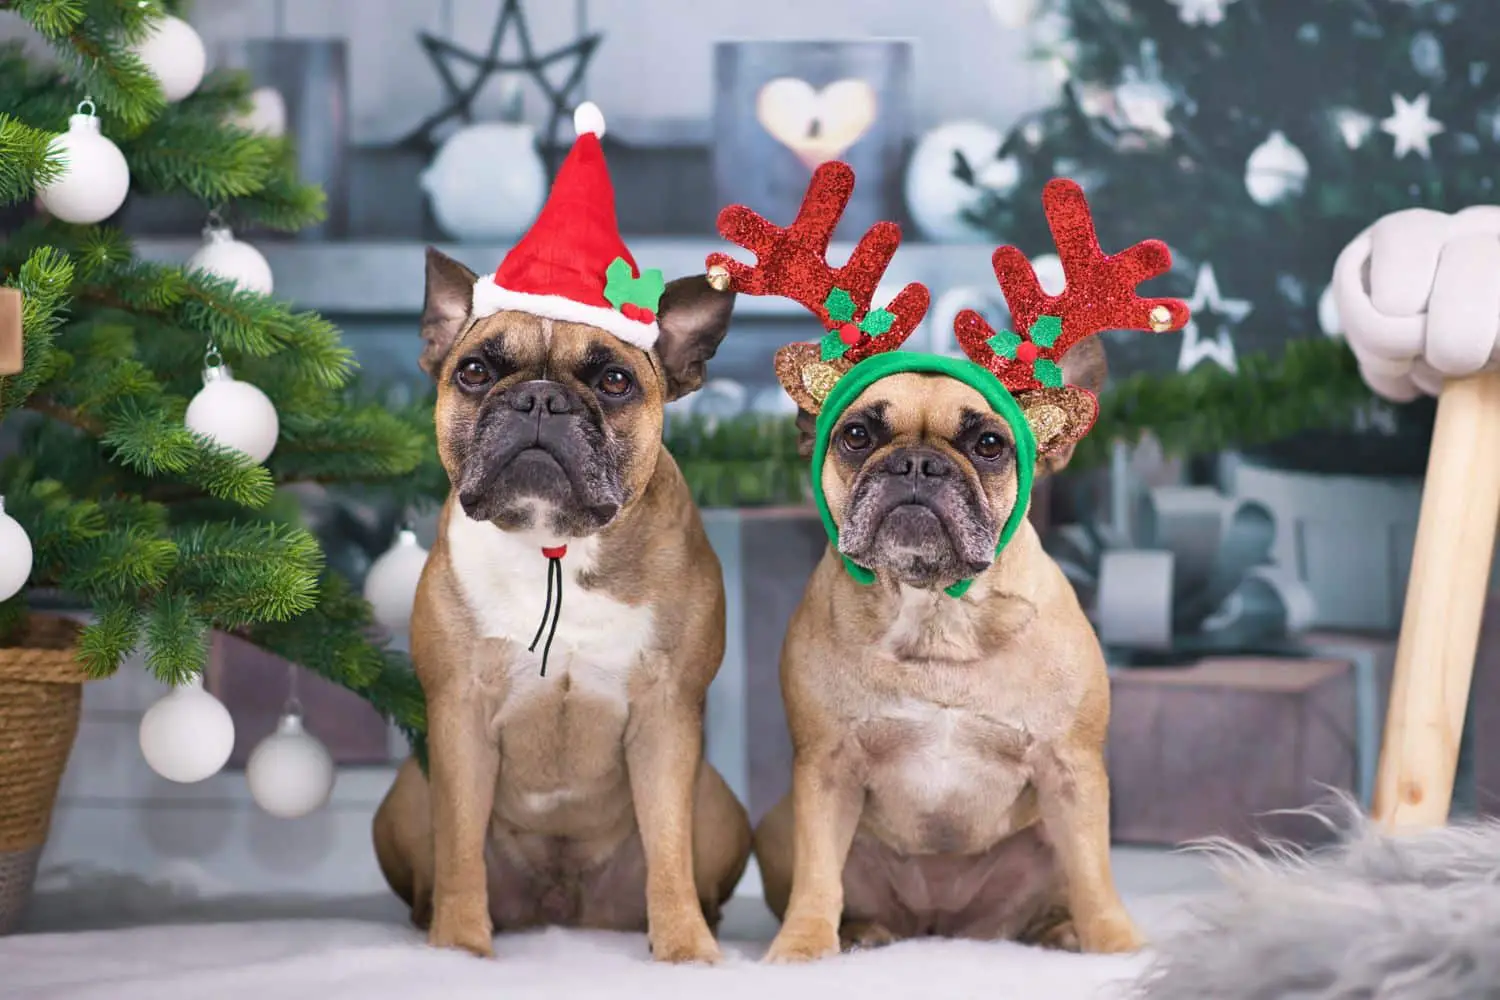 Keeping Your Pets Safe This Holiday Season